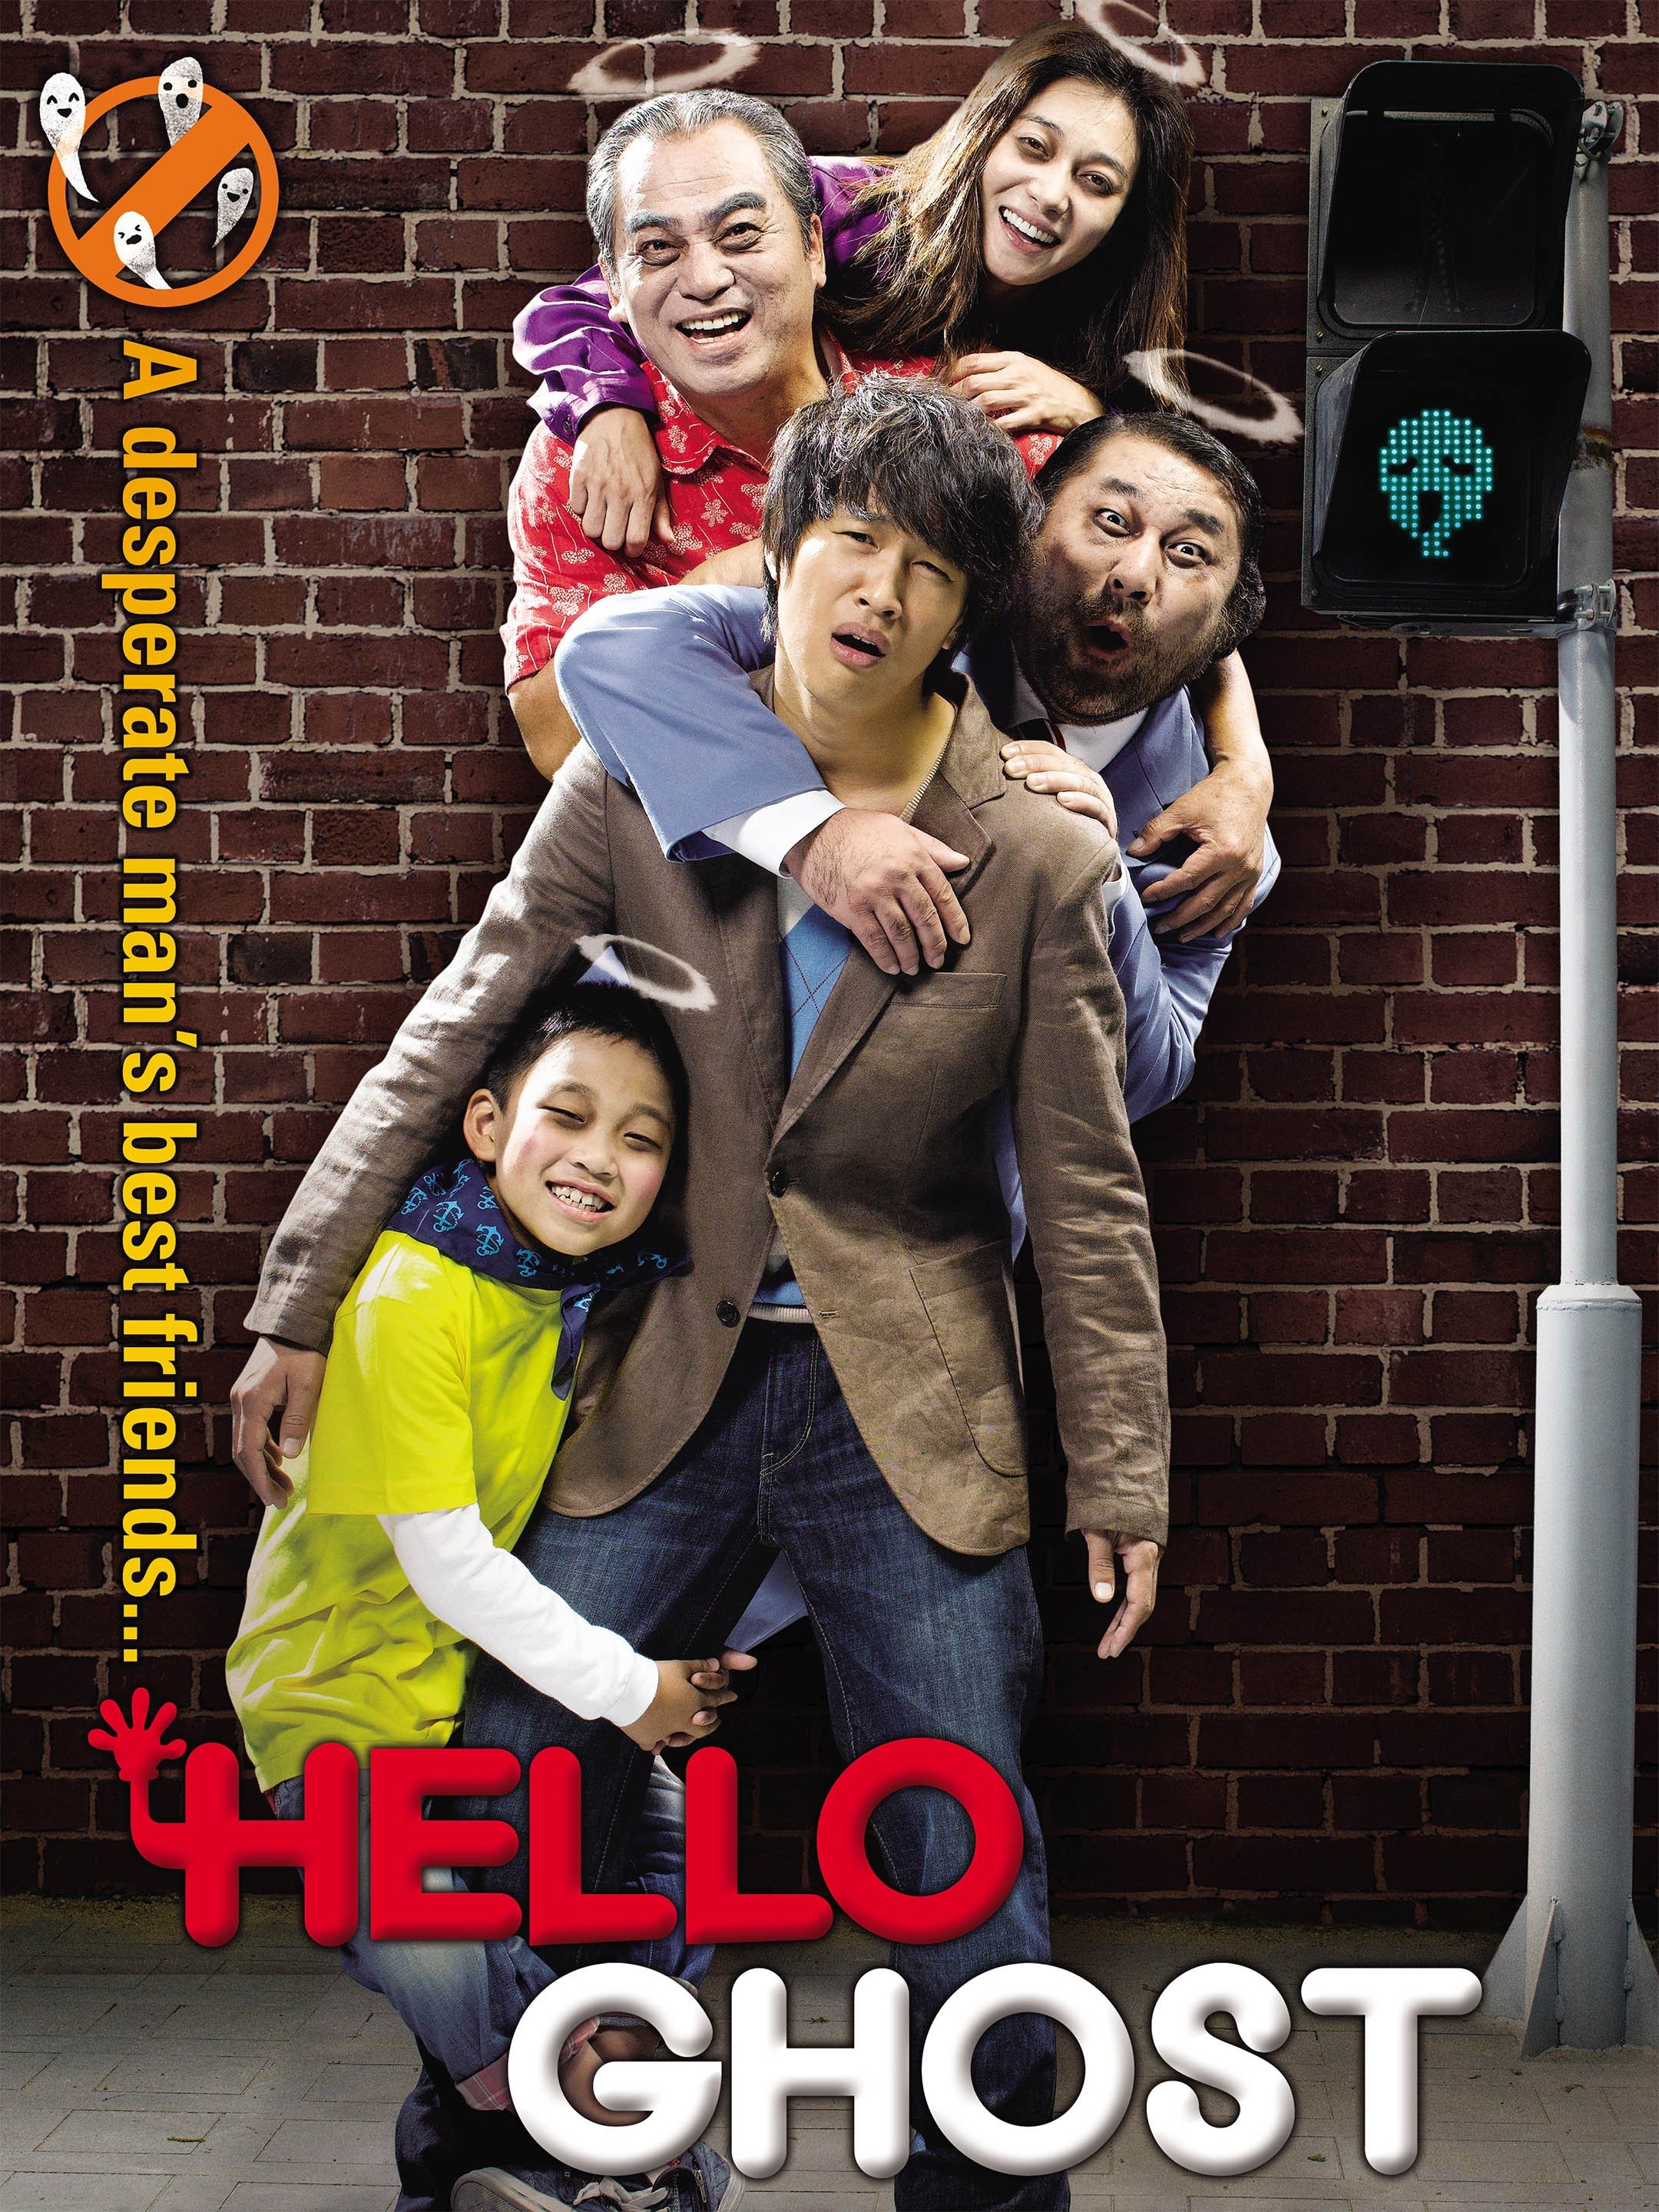 Hello Ghost (2010) - Rotten Tomatoes